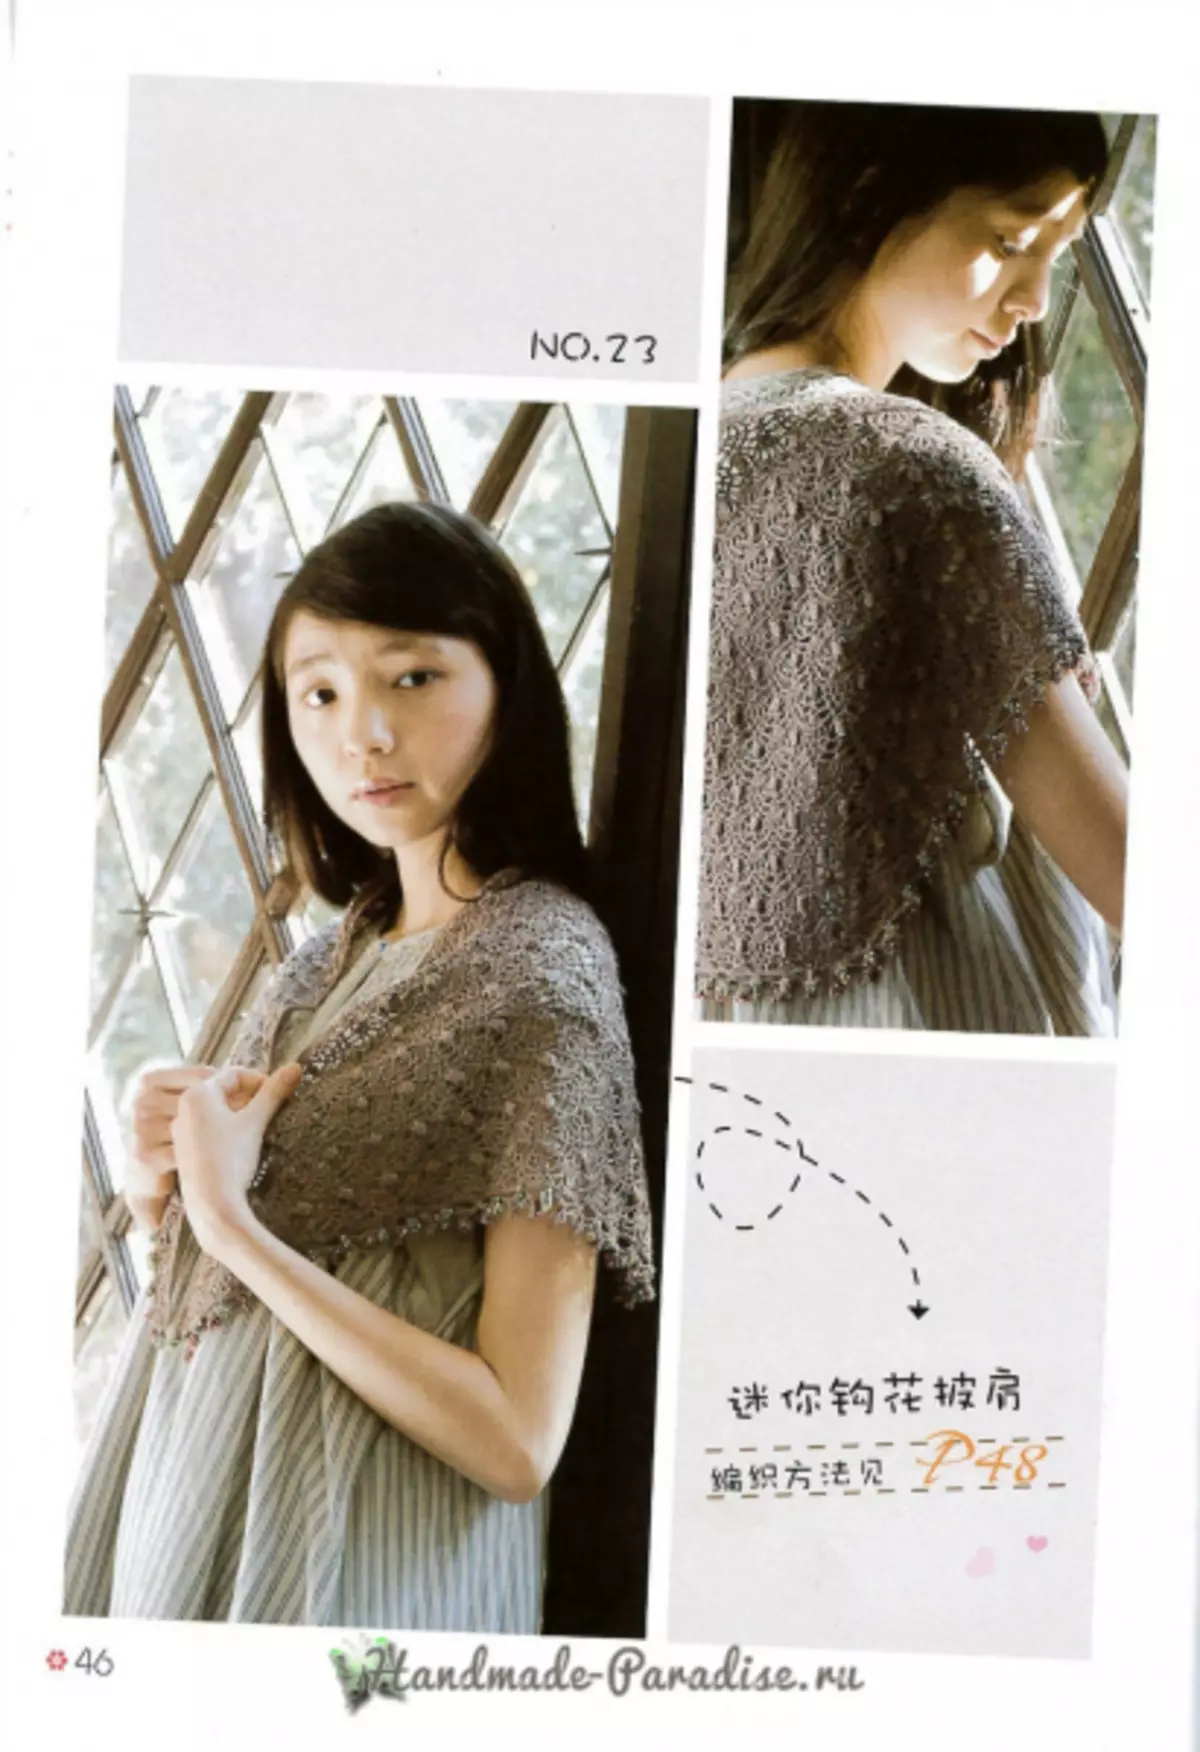 Knitting cape and poncho. Japanese magazine with schemes